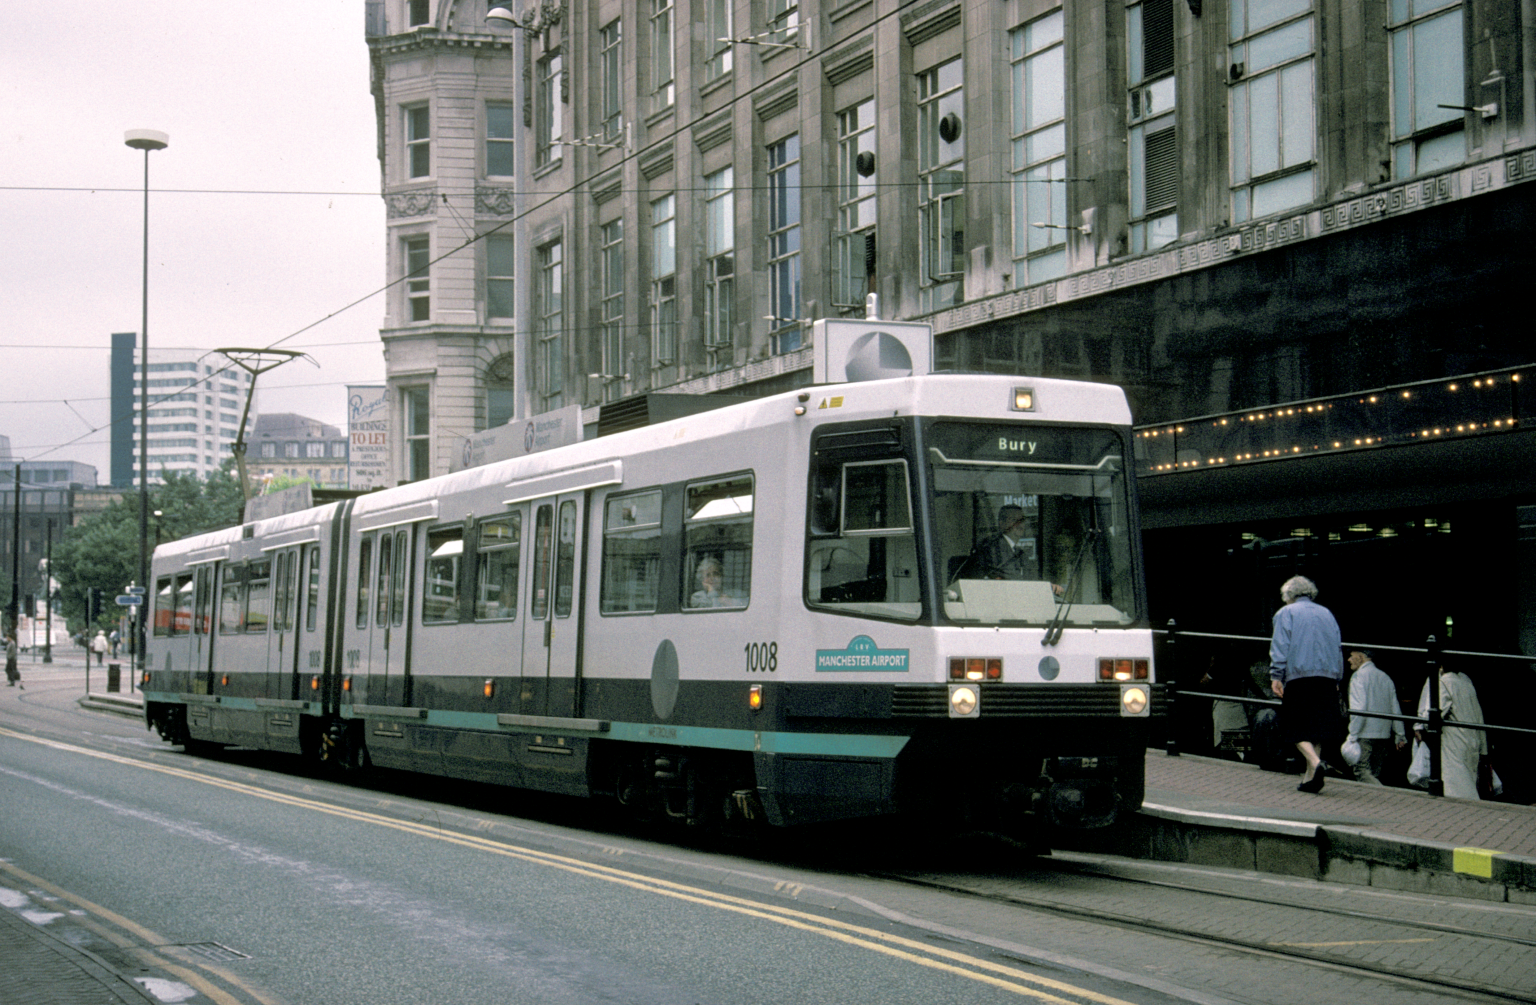 Electric tram in Manchester City Centre heading for Bury, Greater Manchester, on the Manchester Metro, 1996.